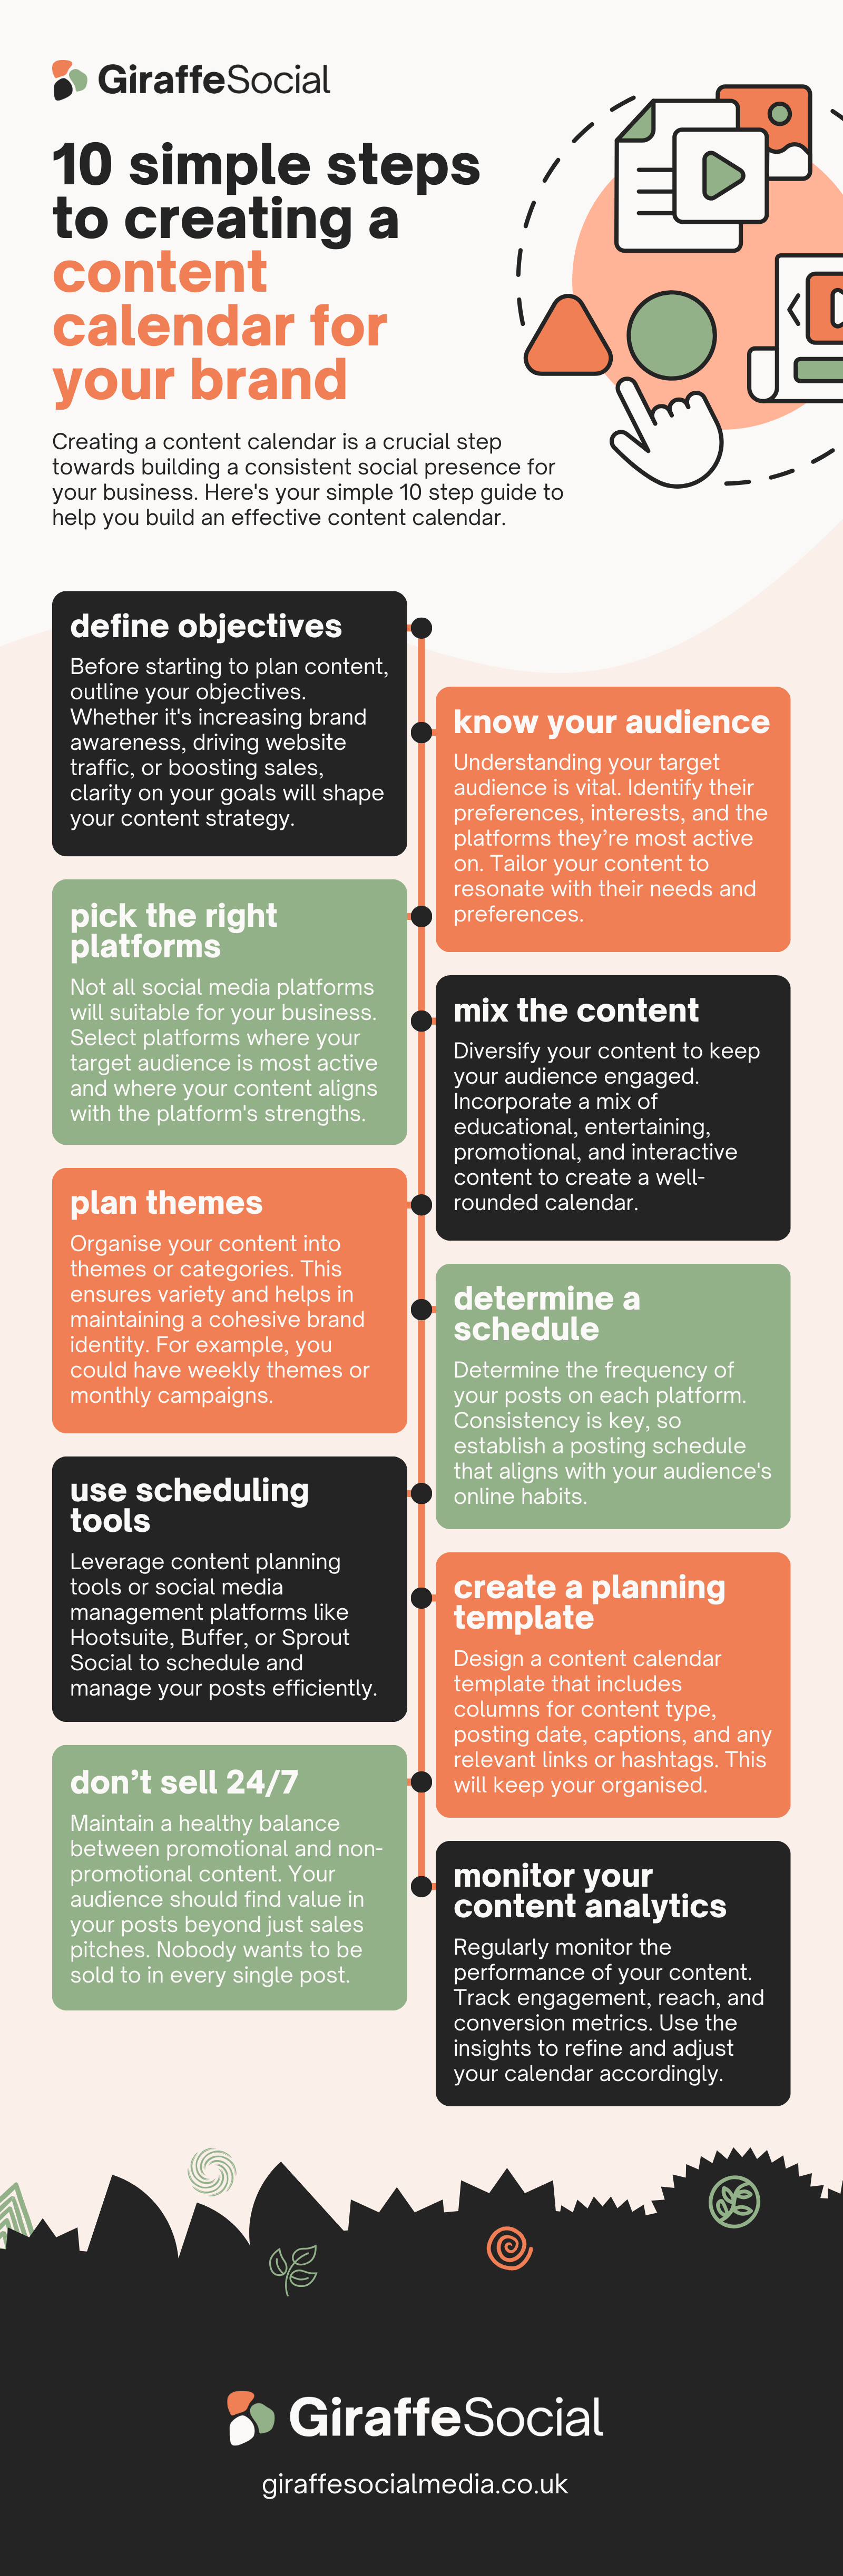 10 Simple Steps to Creating a Content Calendar for Your Brand [INFOGRAPHIC]